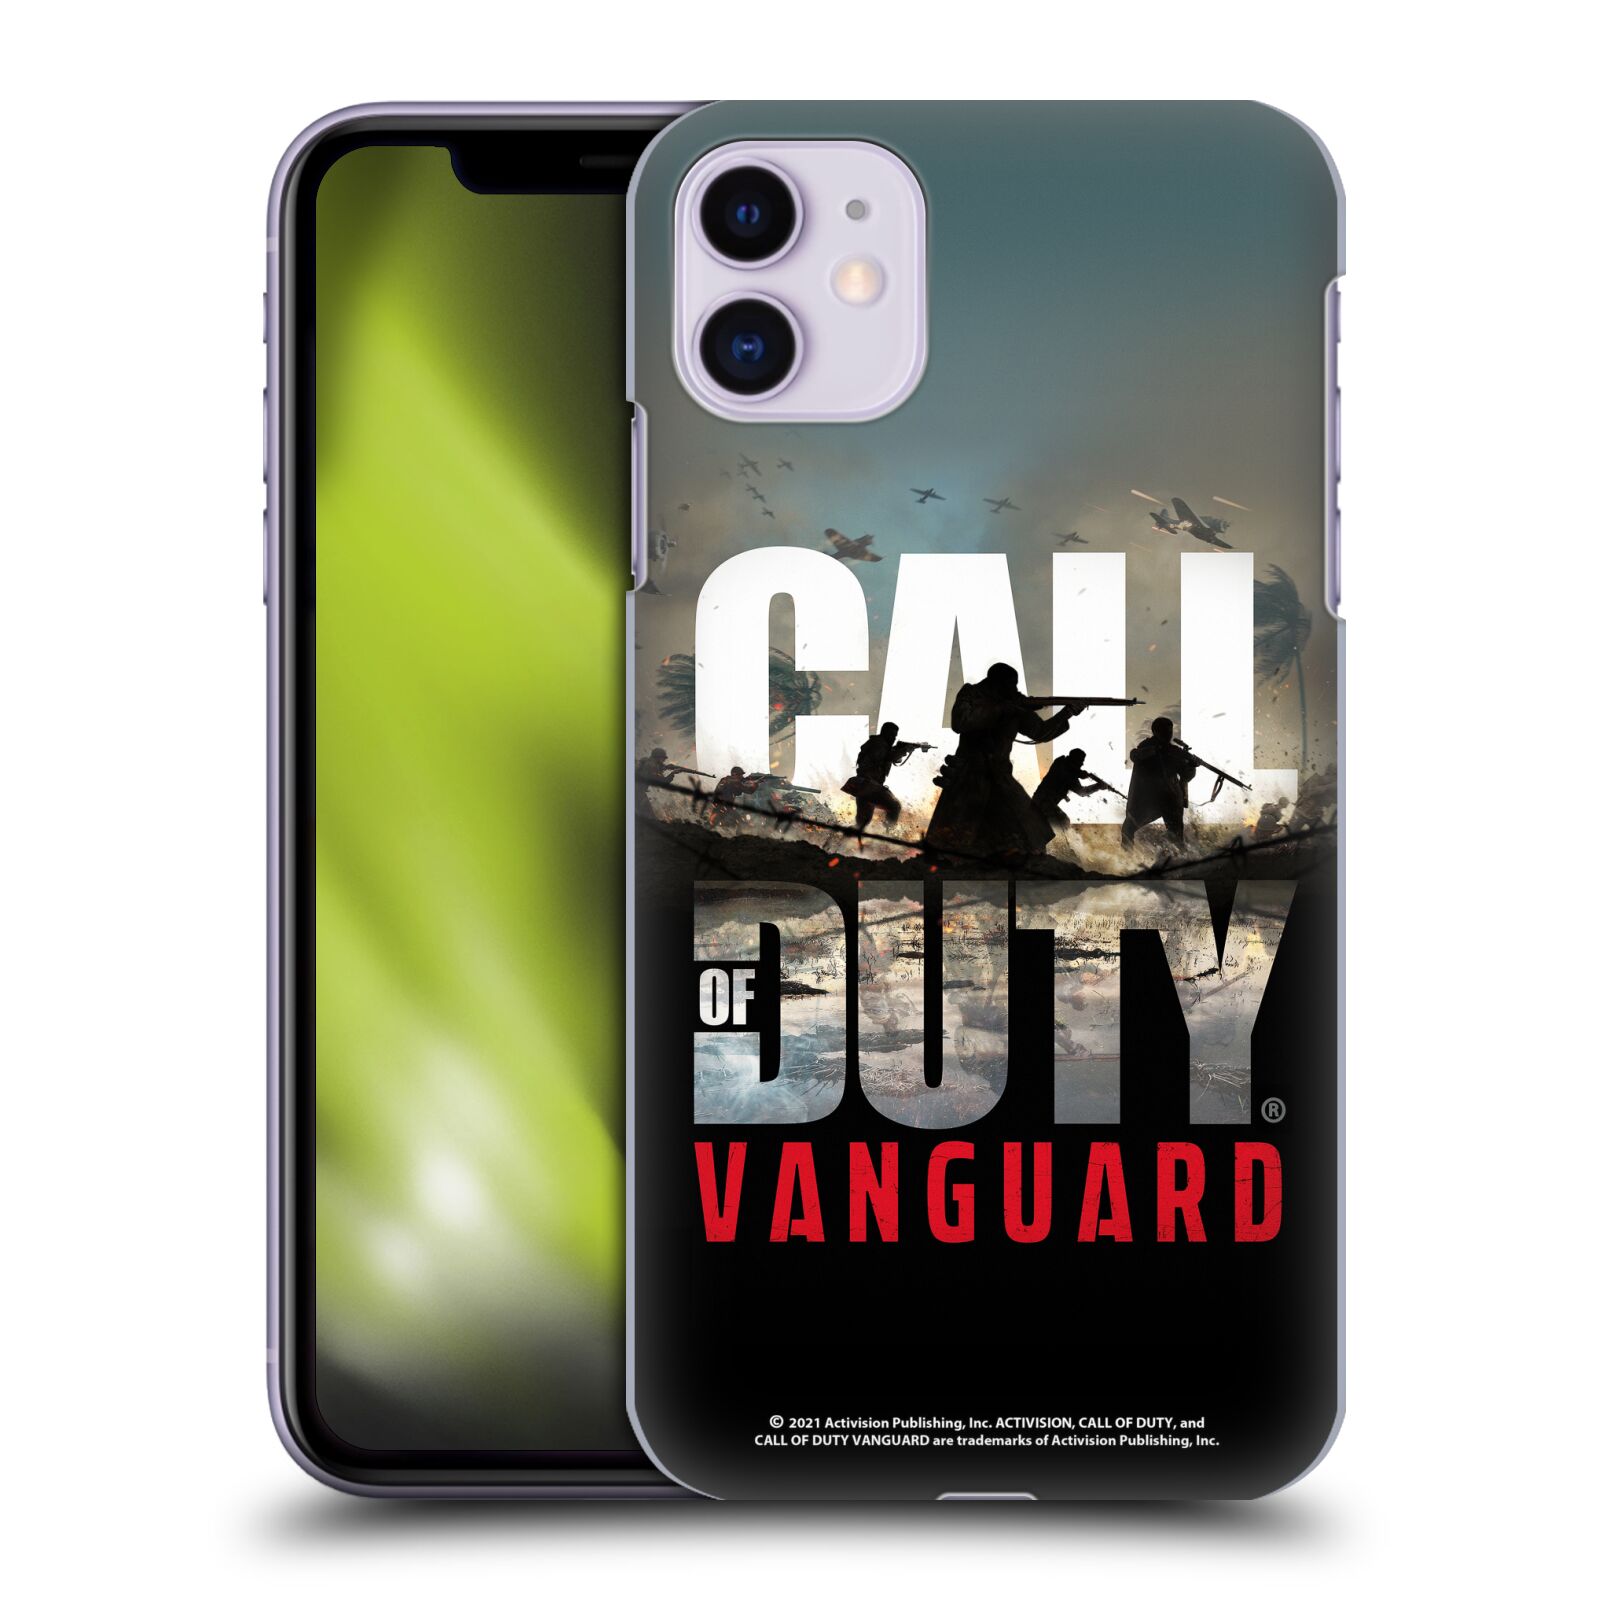 Zadní obal pro mobil Apple Iphone 11 - HEAD CASE - Call of Duty - Vanguard